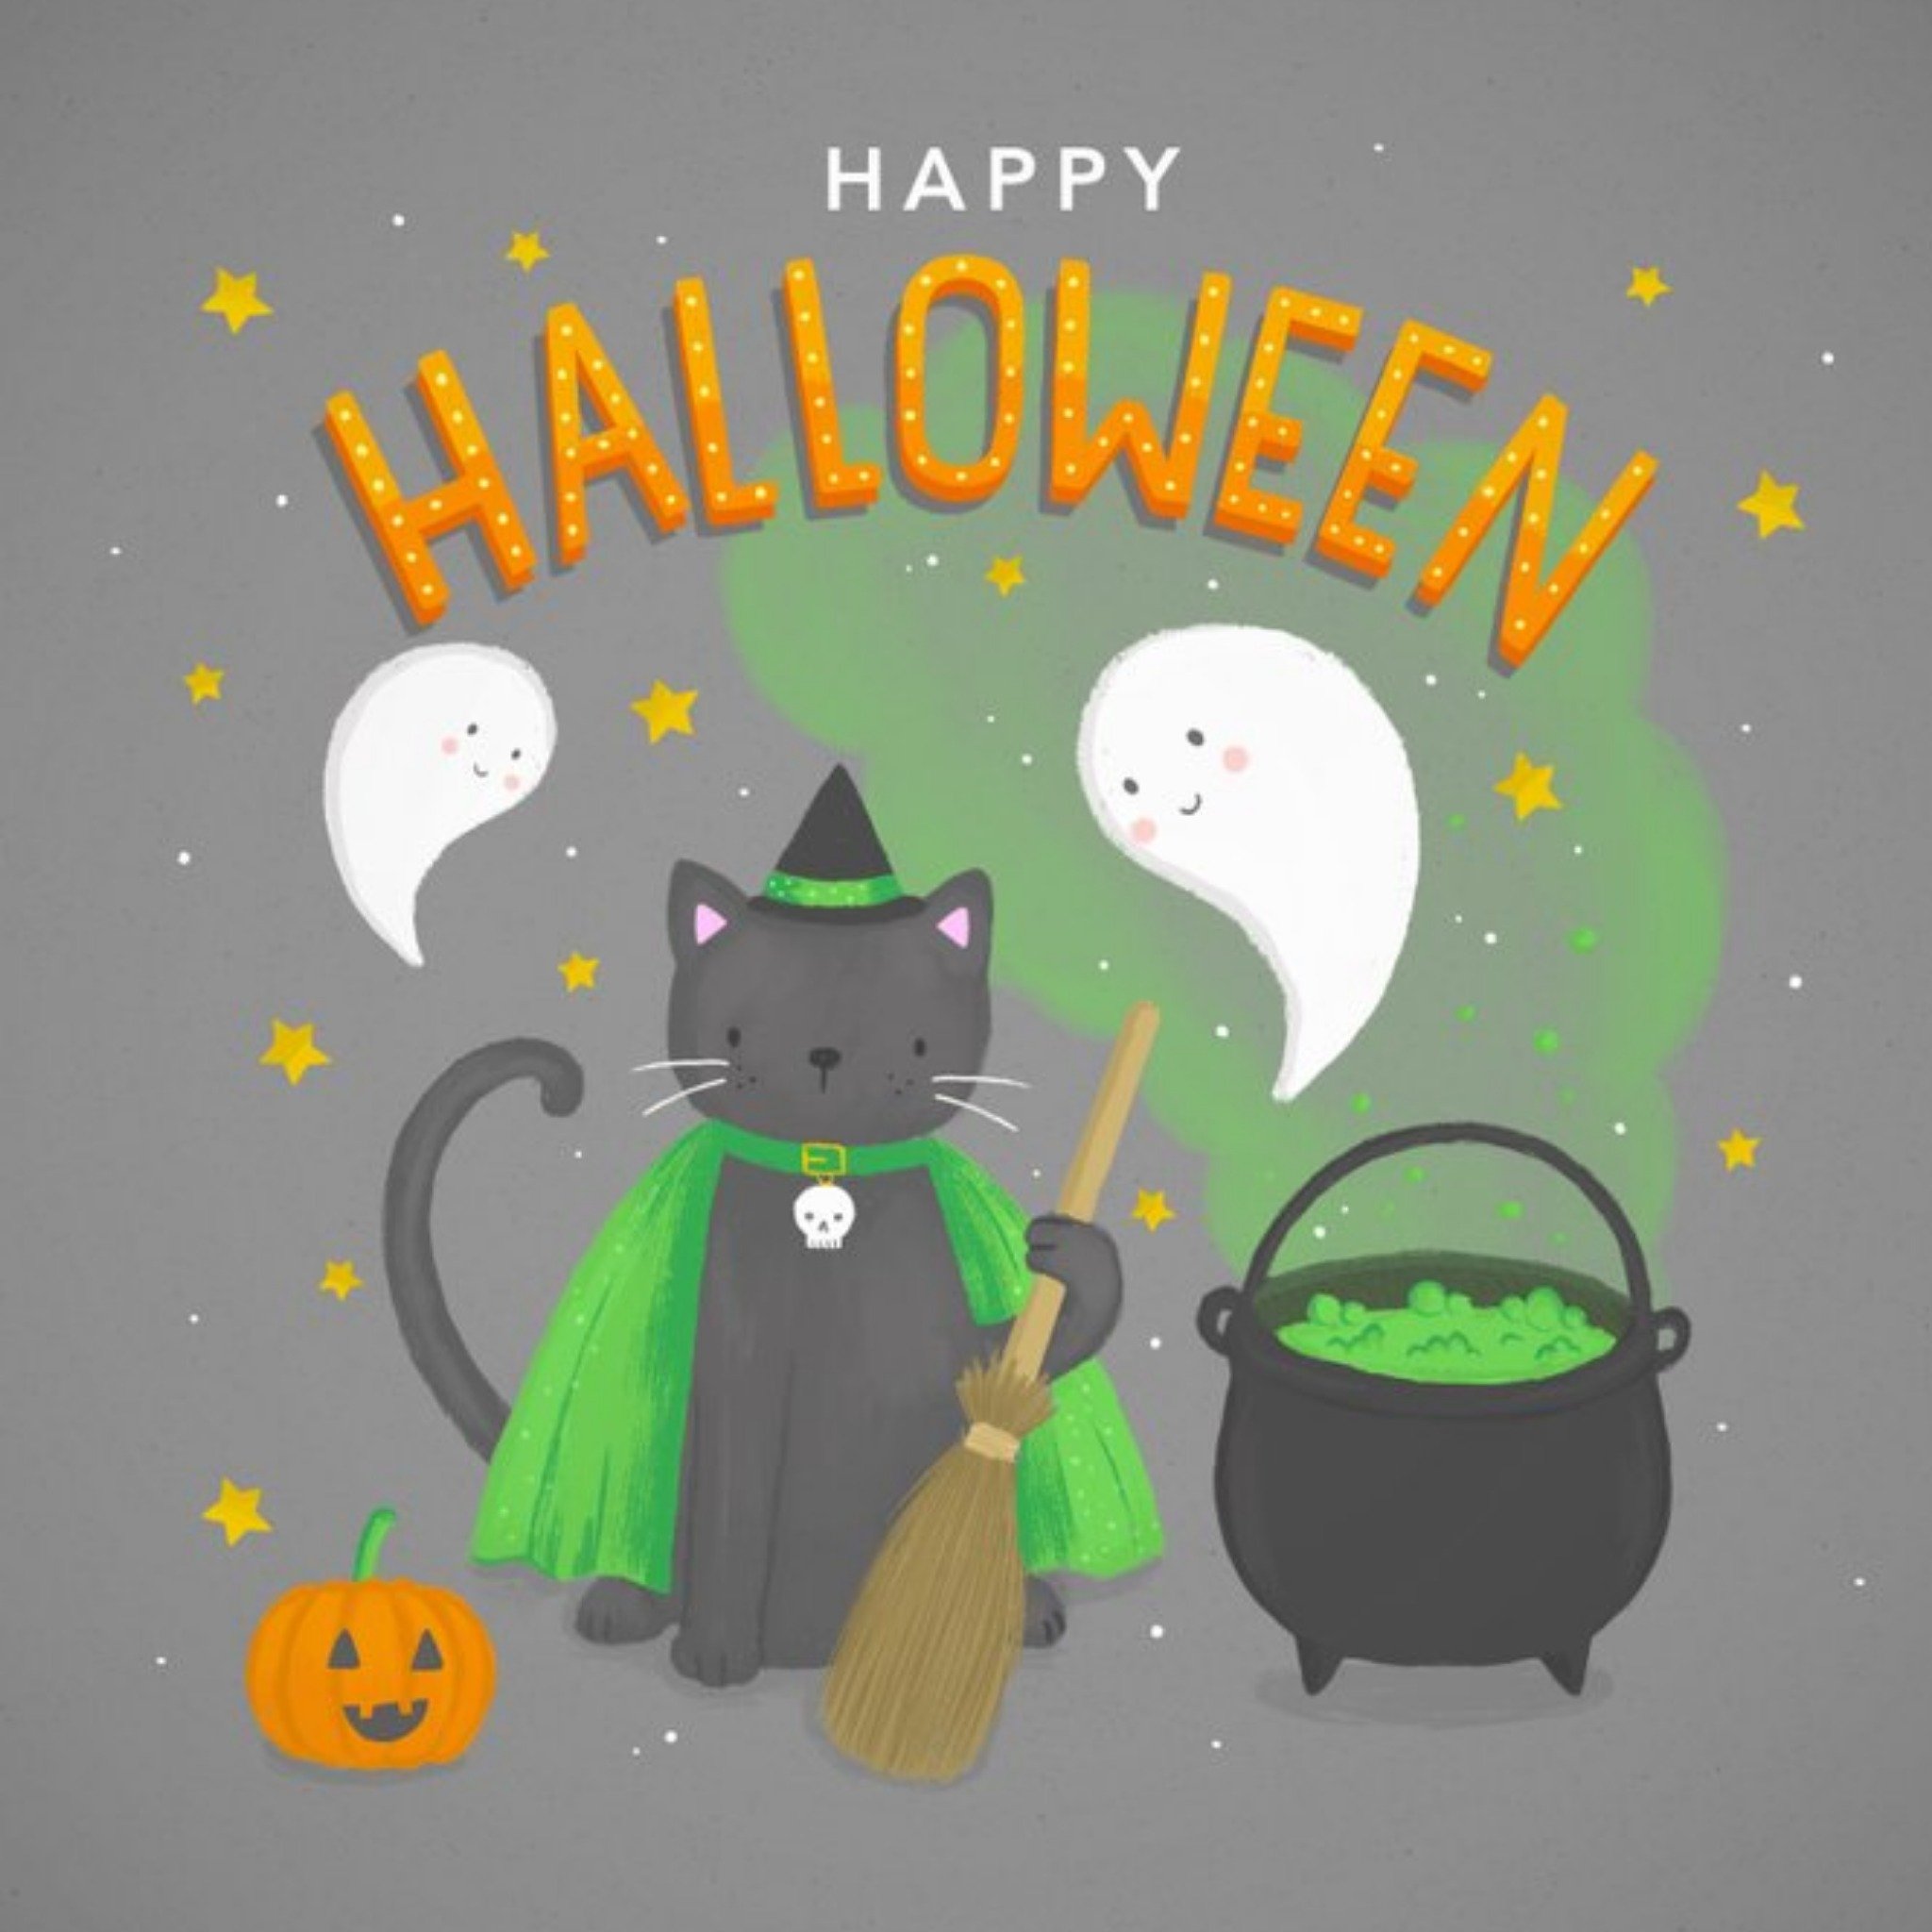 Moonpig Illustration Of A Cat Dressed As A Witch Happy Halloween Card, Large